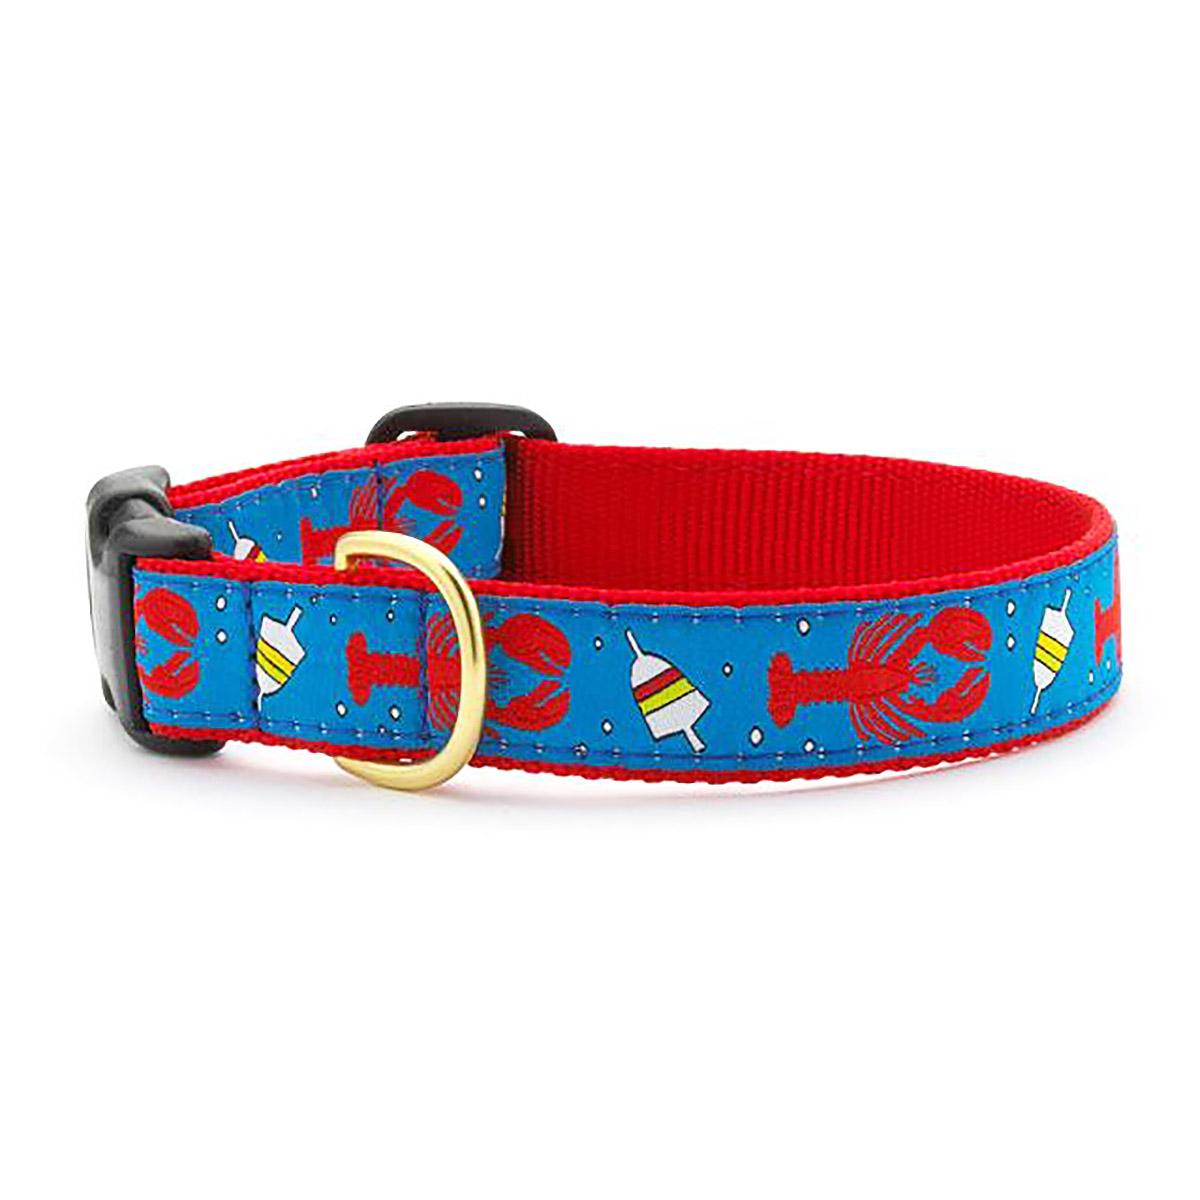 Lobster & Buoy Dog Collar by Up Country